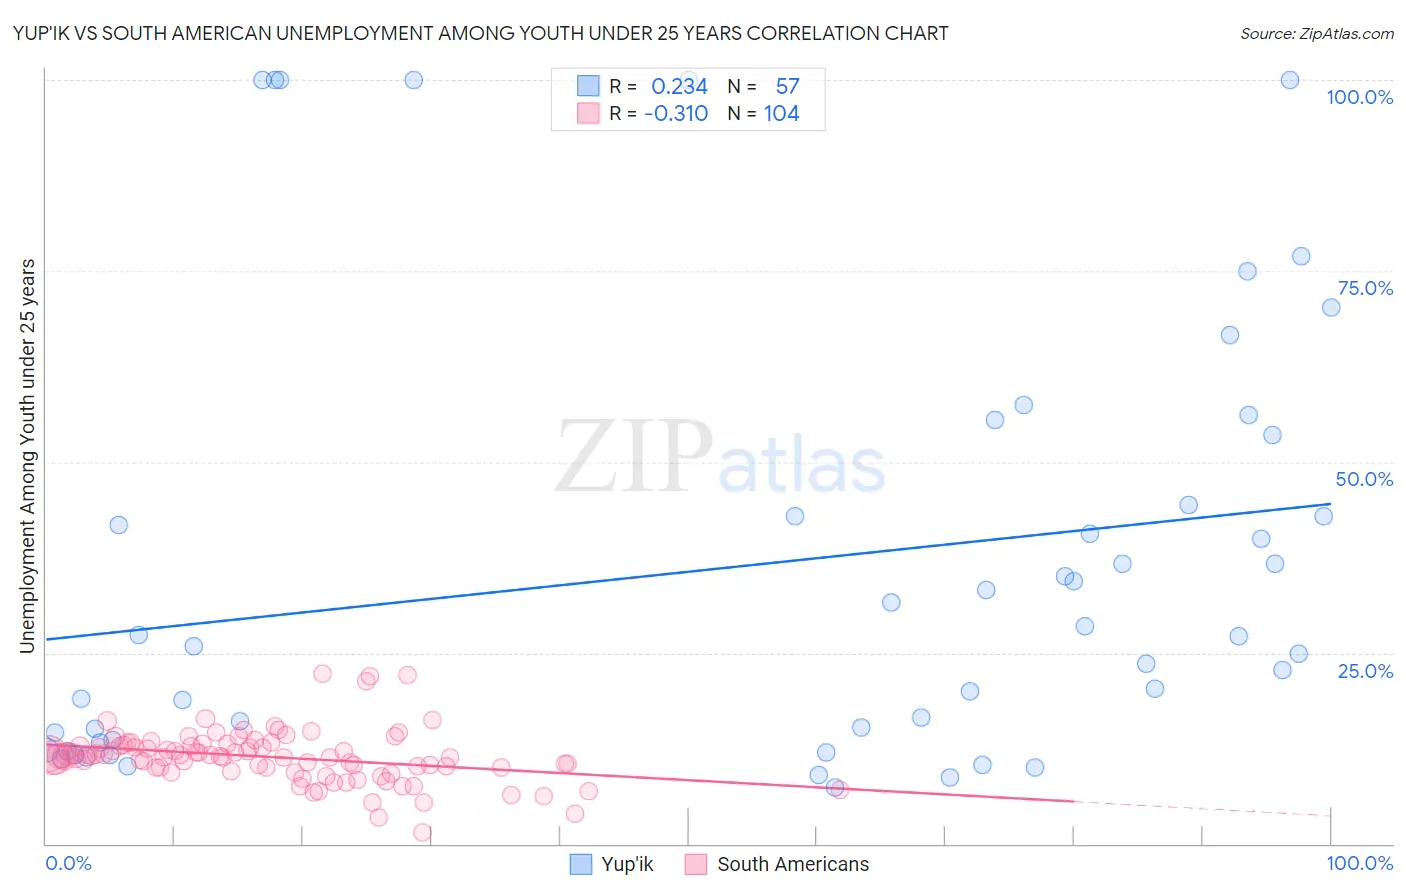 Yup'ik vs South American Unemployment Among Youth under 25 years